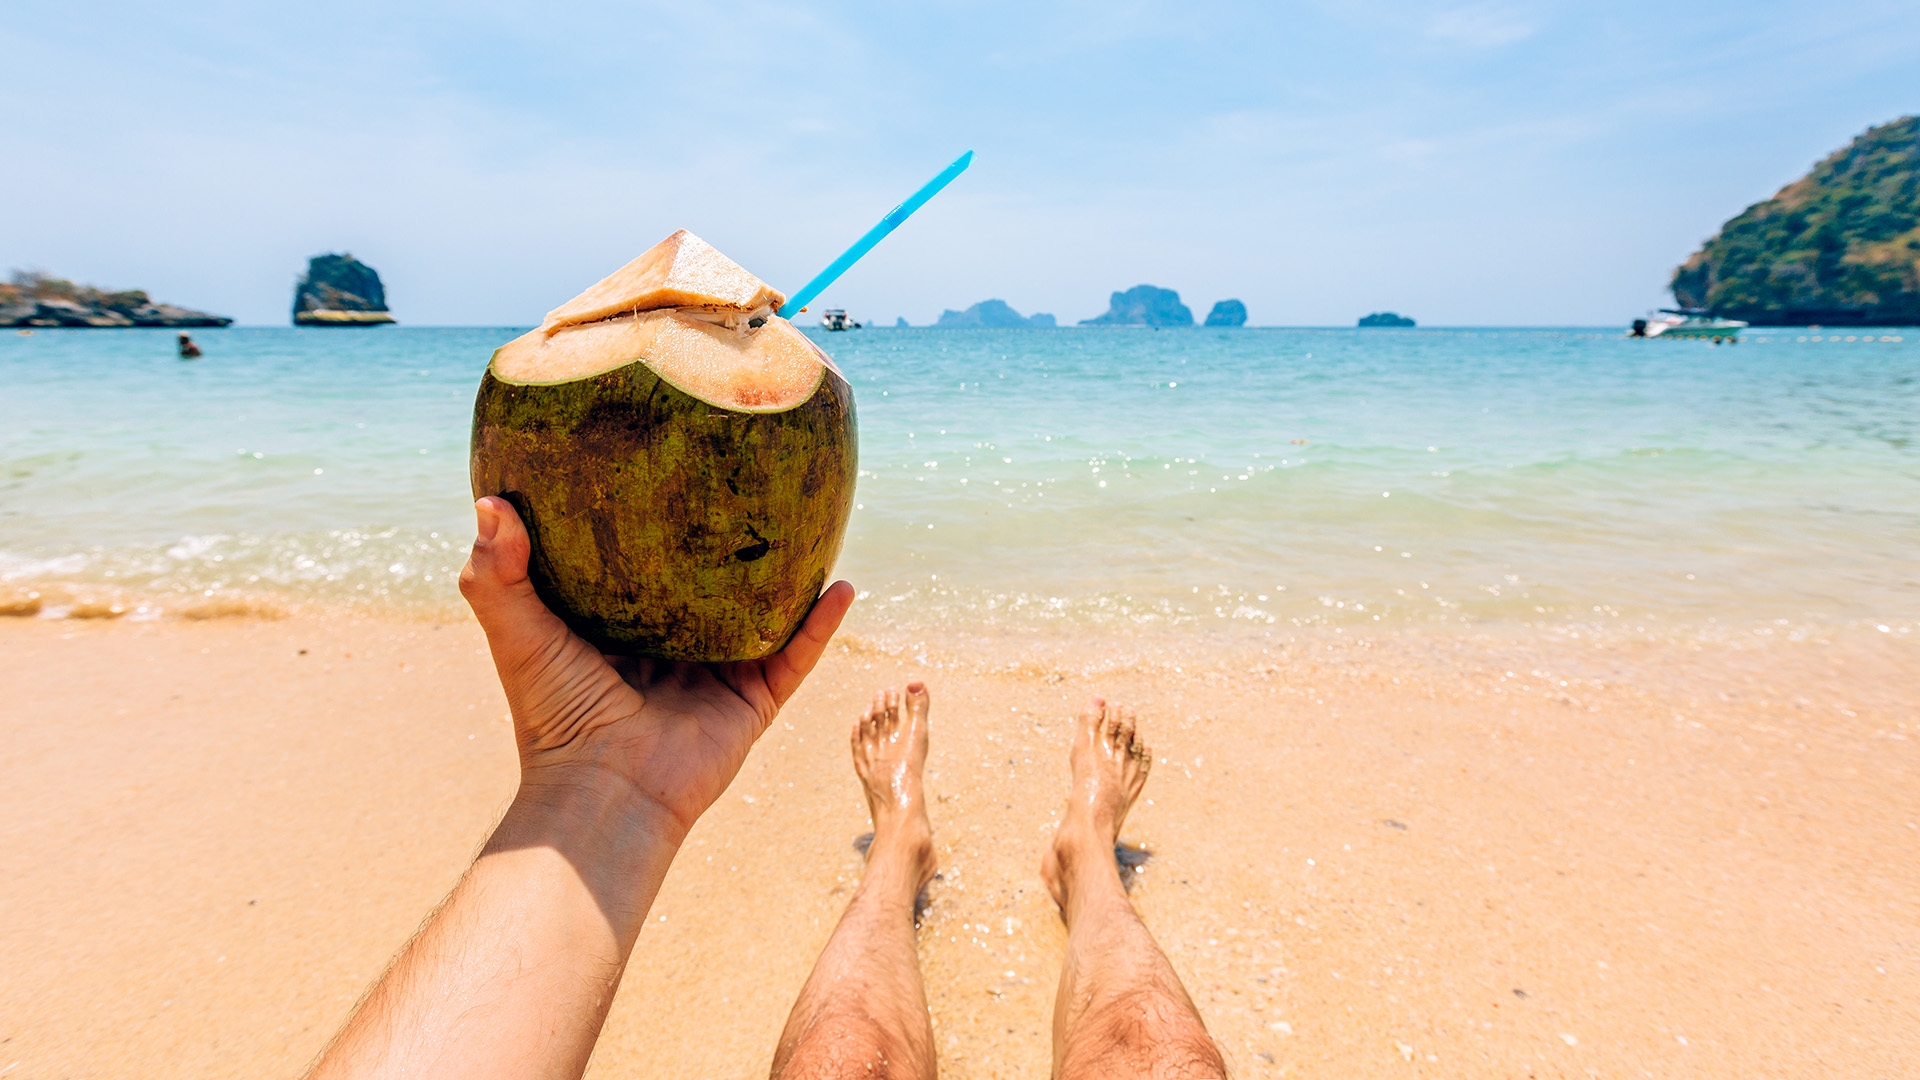 Man drinking fresh coconut milk while relaxing by the ocean at the beach, personal perspective view - stock photo